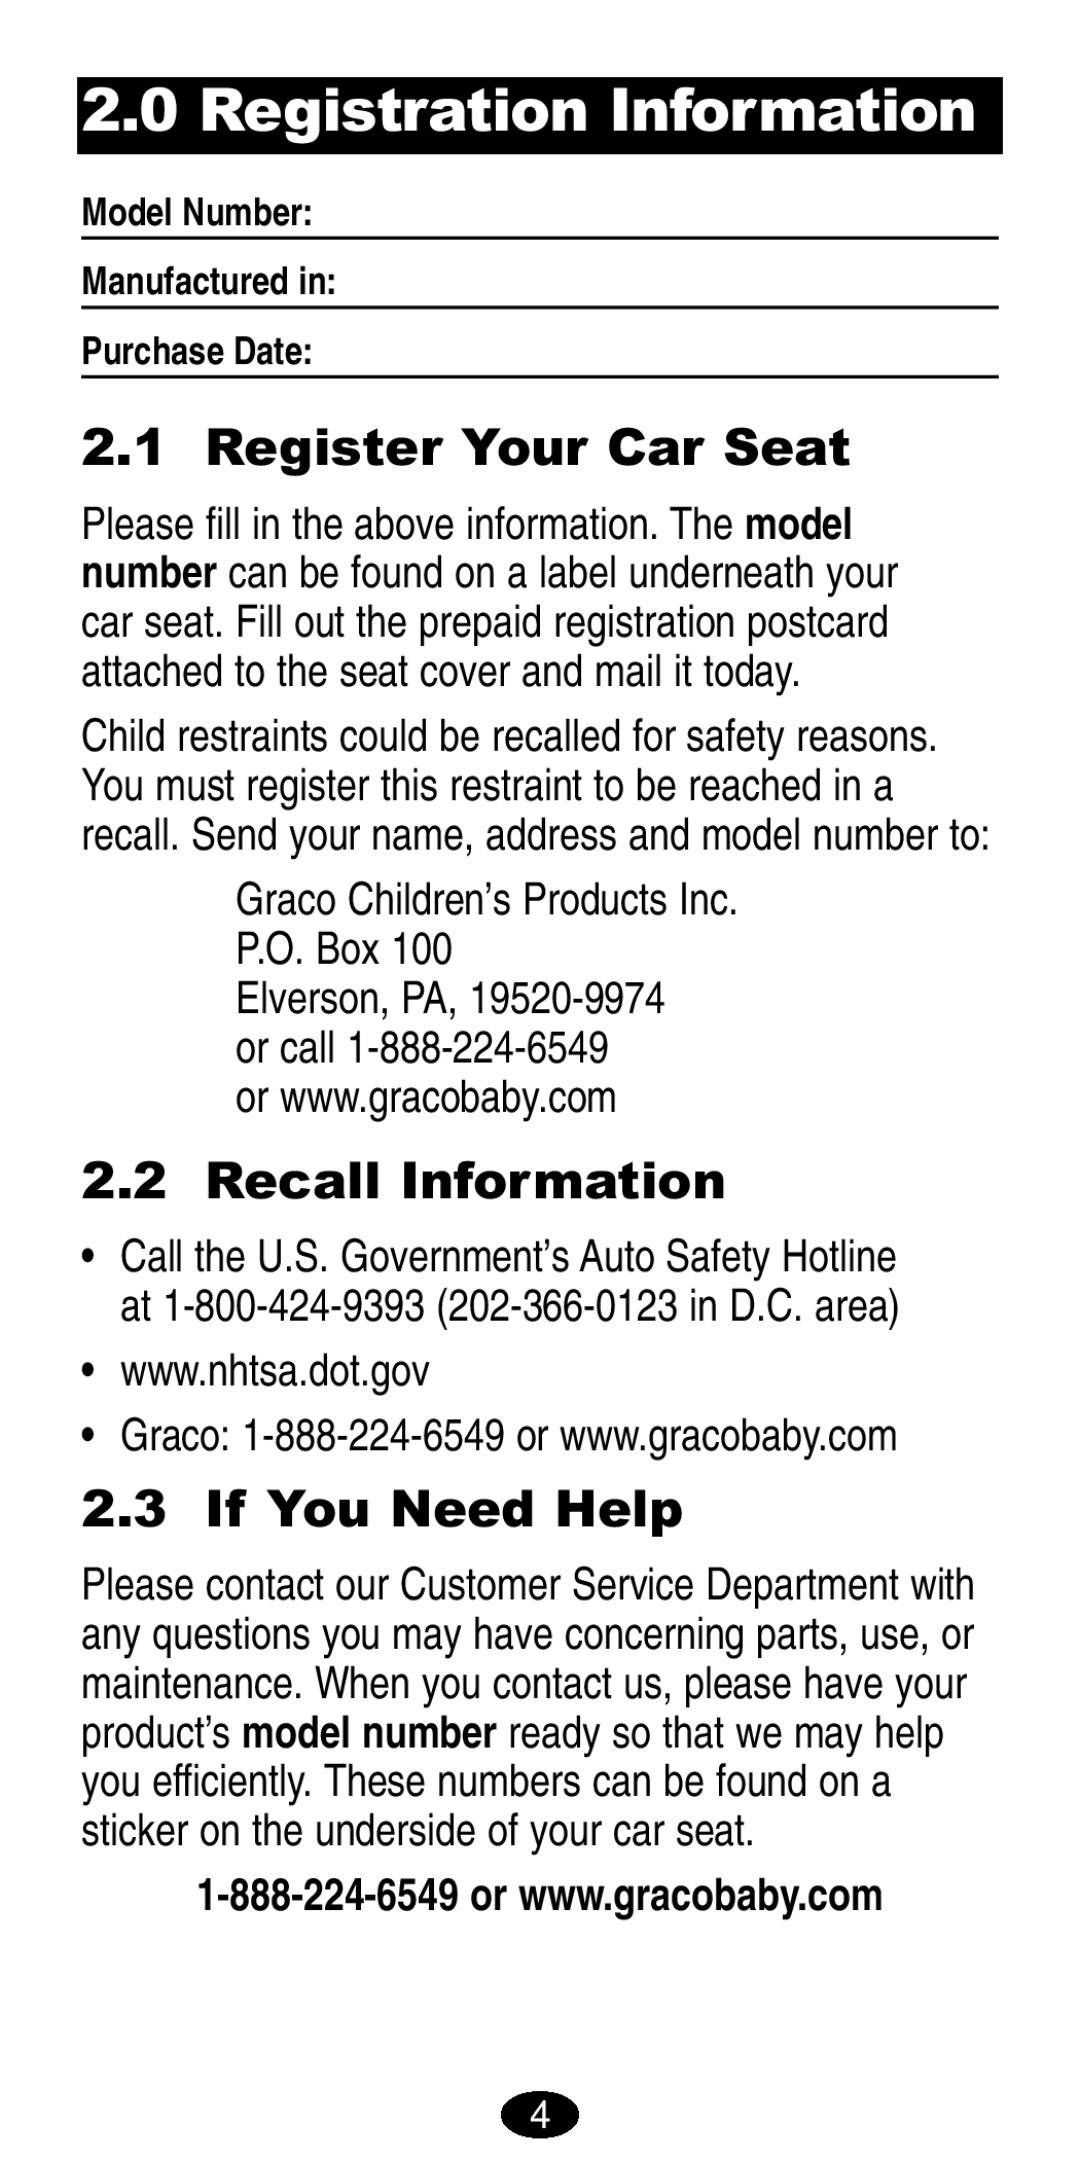 Graco 8490, 8486 manual Registration Information, Register Your Car Seat, Recall Information, If You Need Help 